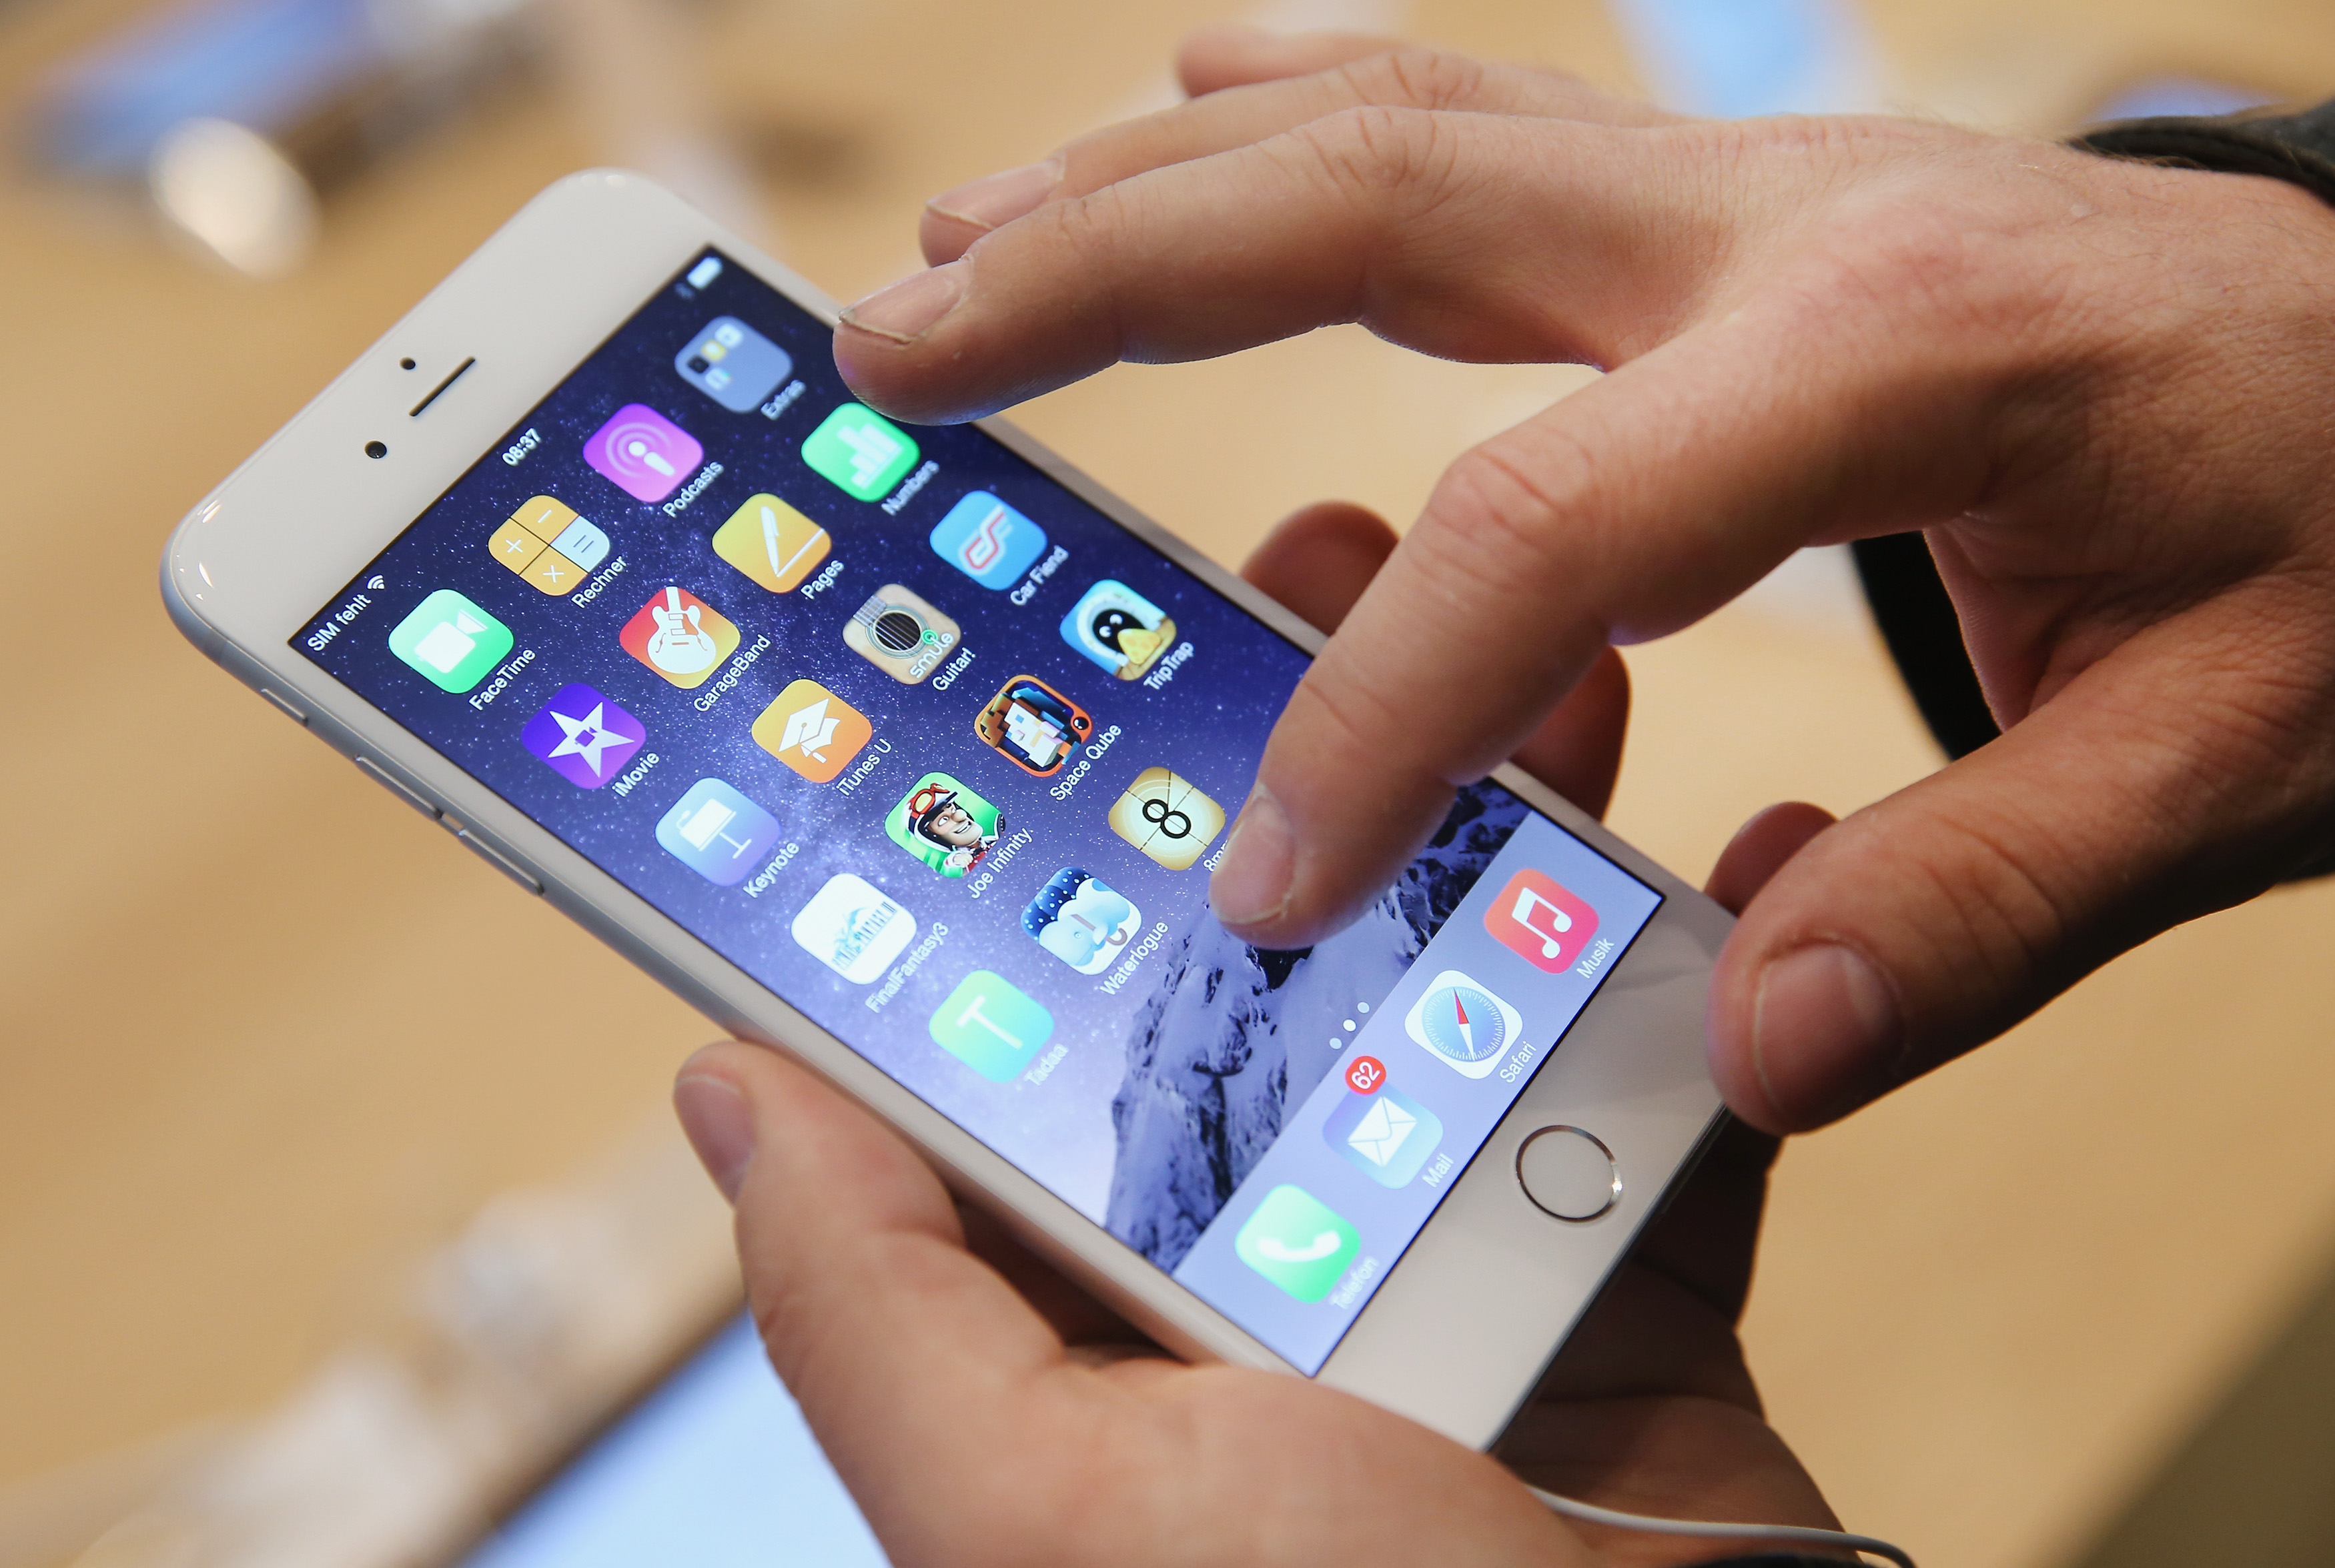 A shopper ltries out the new Apple iPhone 6 at the Apple Store on the first day of sales of the new phone in Germany on September 19, 2014 in Berlin, Germany. (Sean Gallup&mdash;Getty Images)